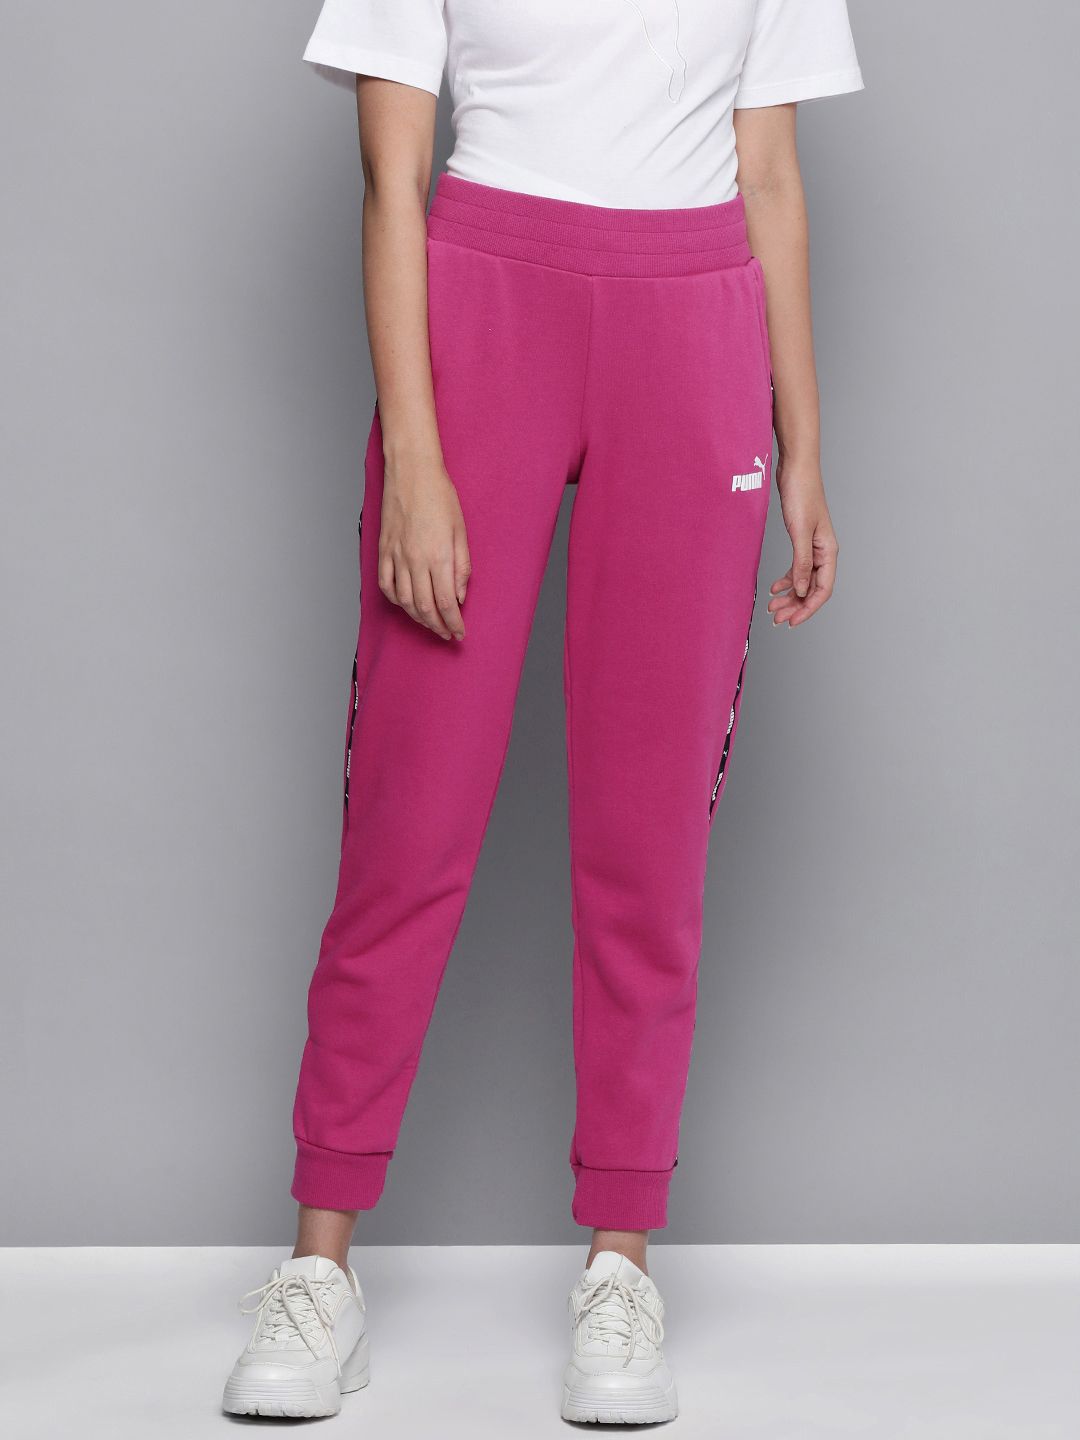 Puma Women Fuchsia Solid Power Tape Sustainable Joggers Price in India